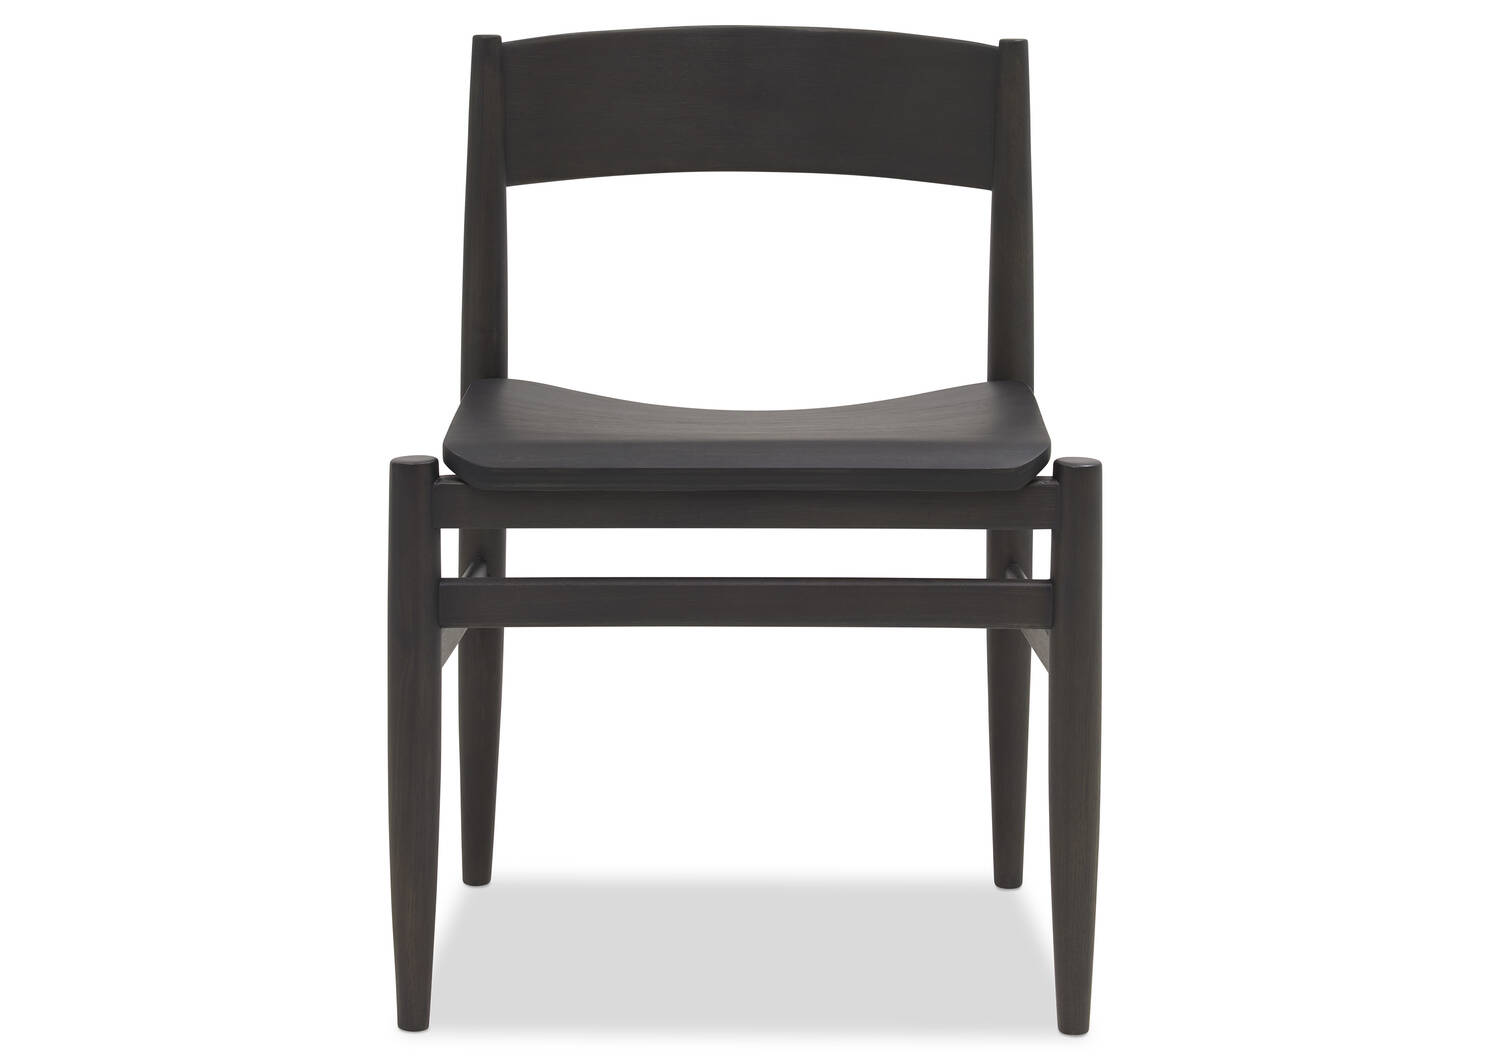 Archie Dining Chair -Charcoal